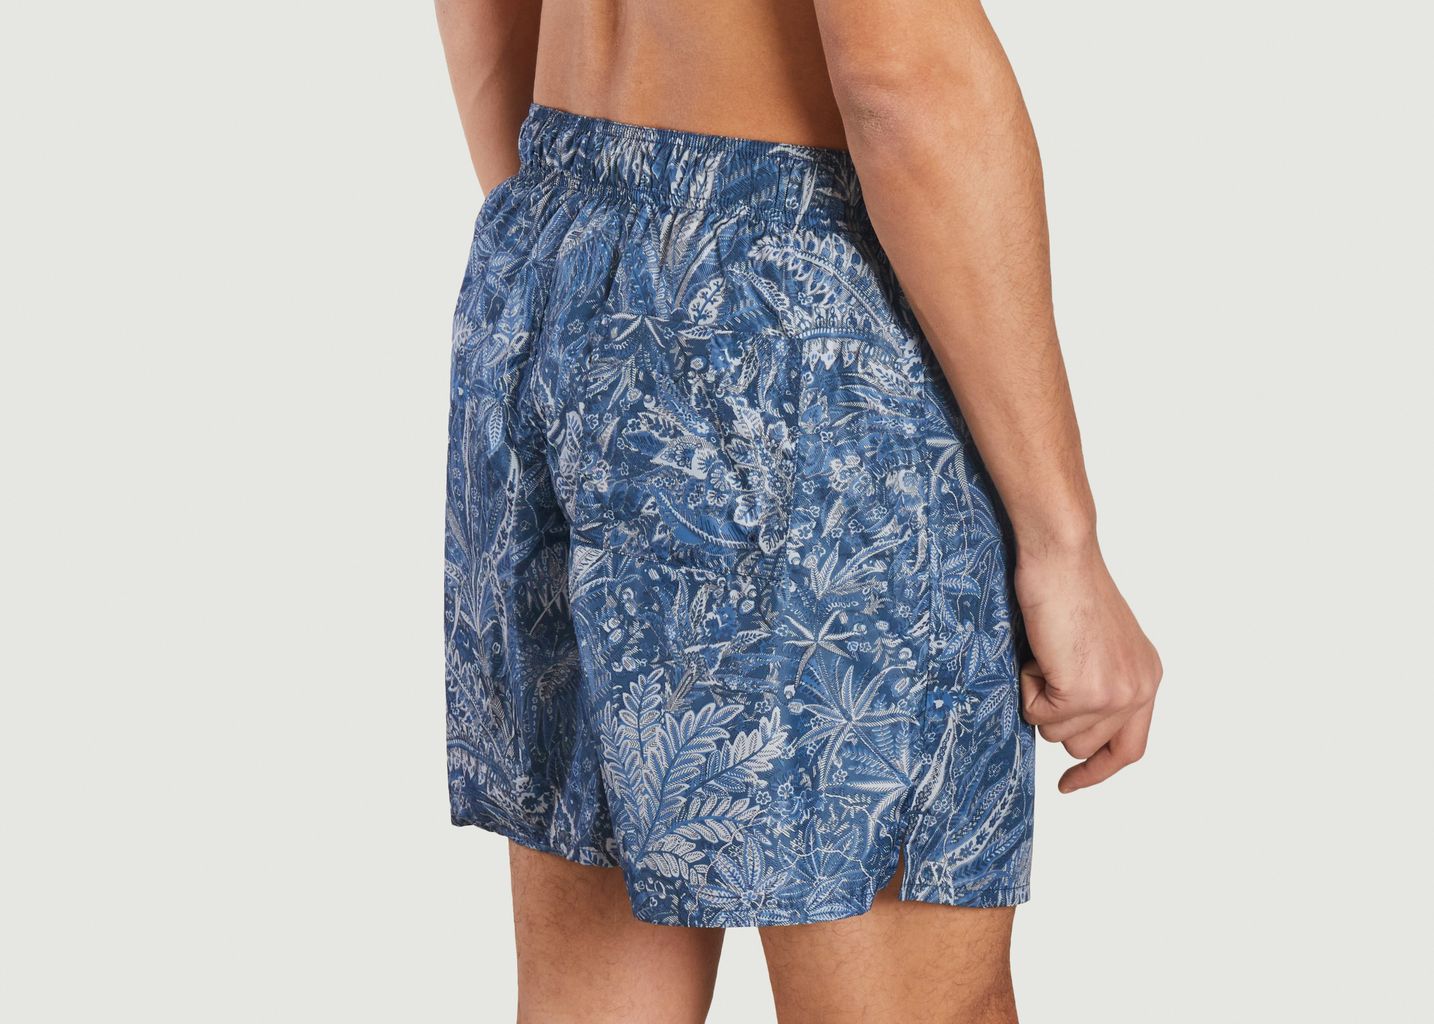 Forrest shorts - A.P.C.